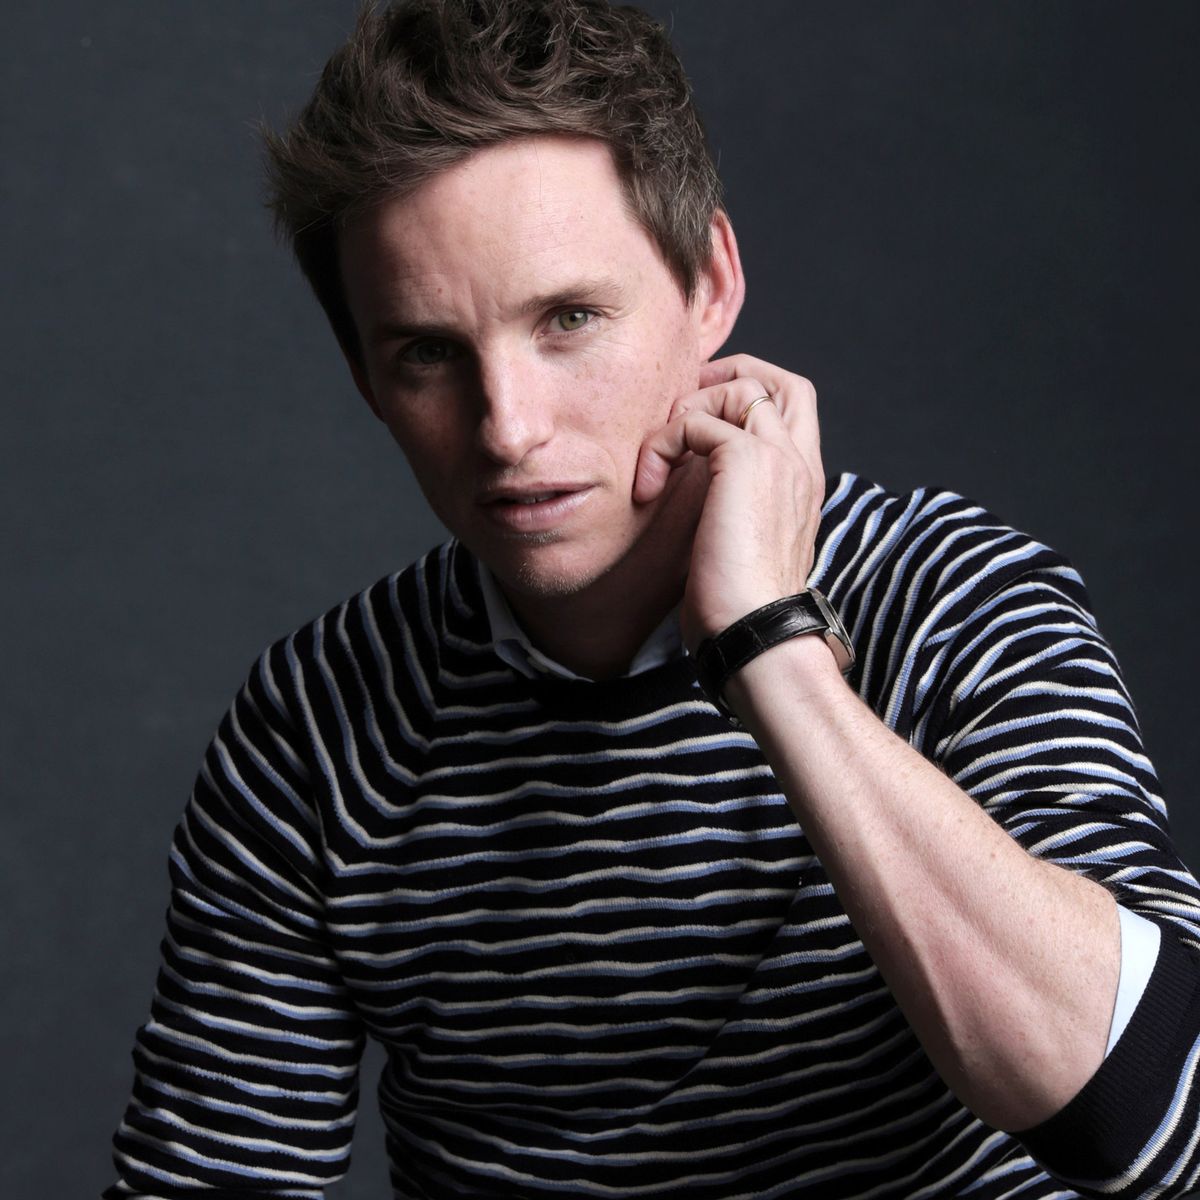 And so was born my theory, which is as follows: Eddie Redmayne likes to roll his sleeves up in real life, so much so that he makes sure it happens to almost all his characters on screen. Here are some photos of Eddie Redmayne irl.